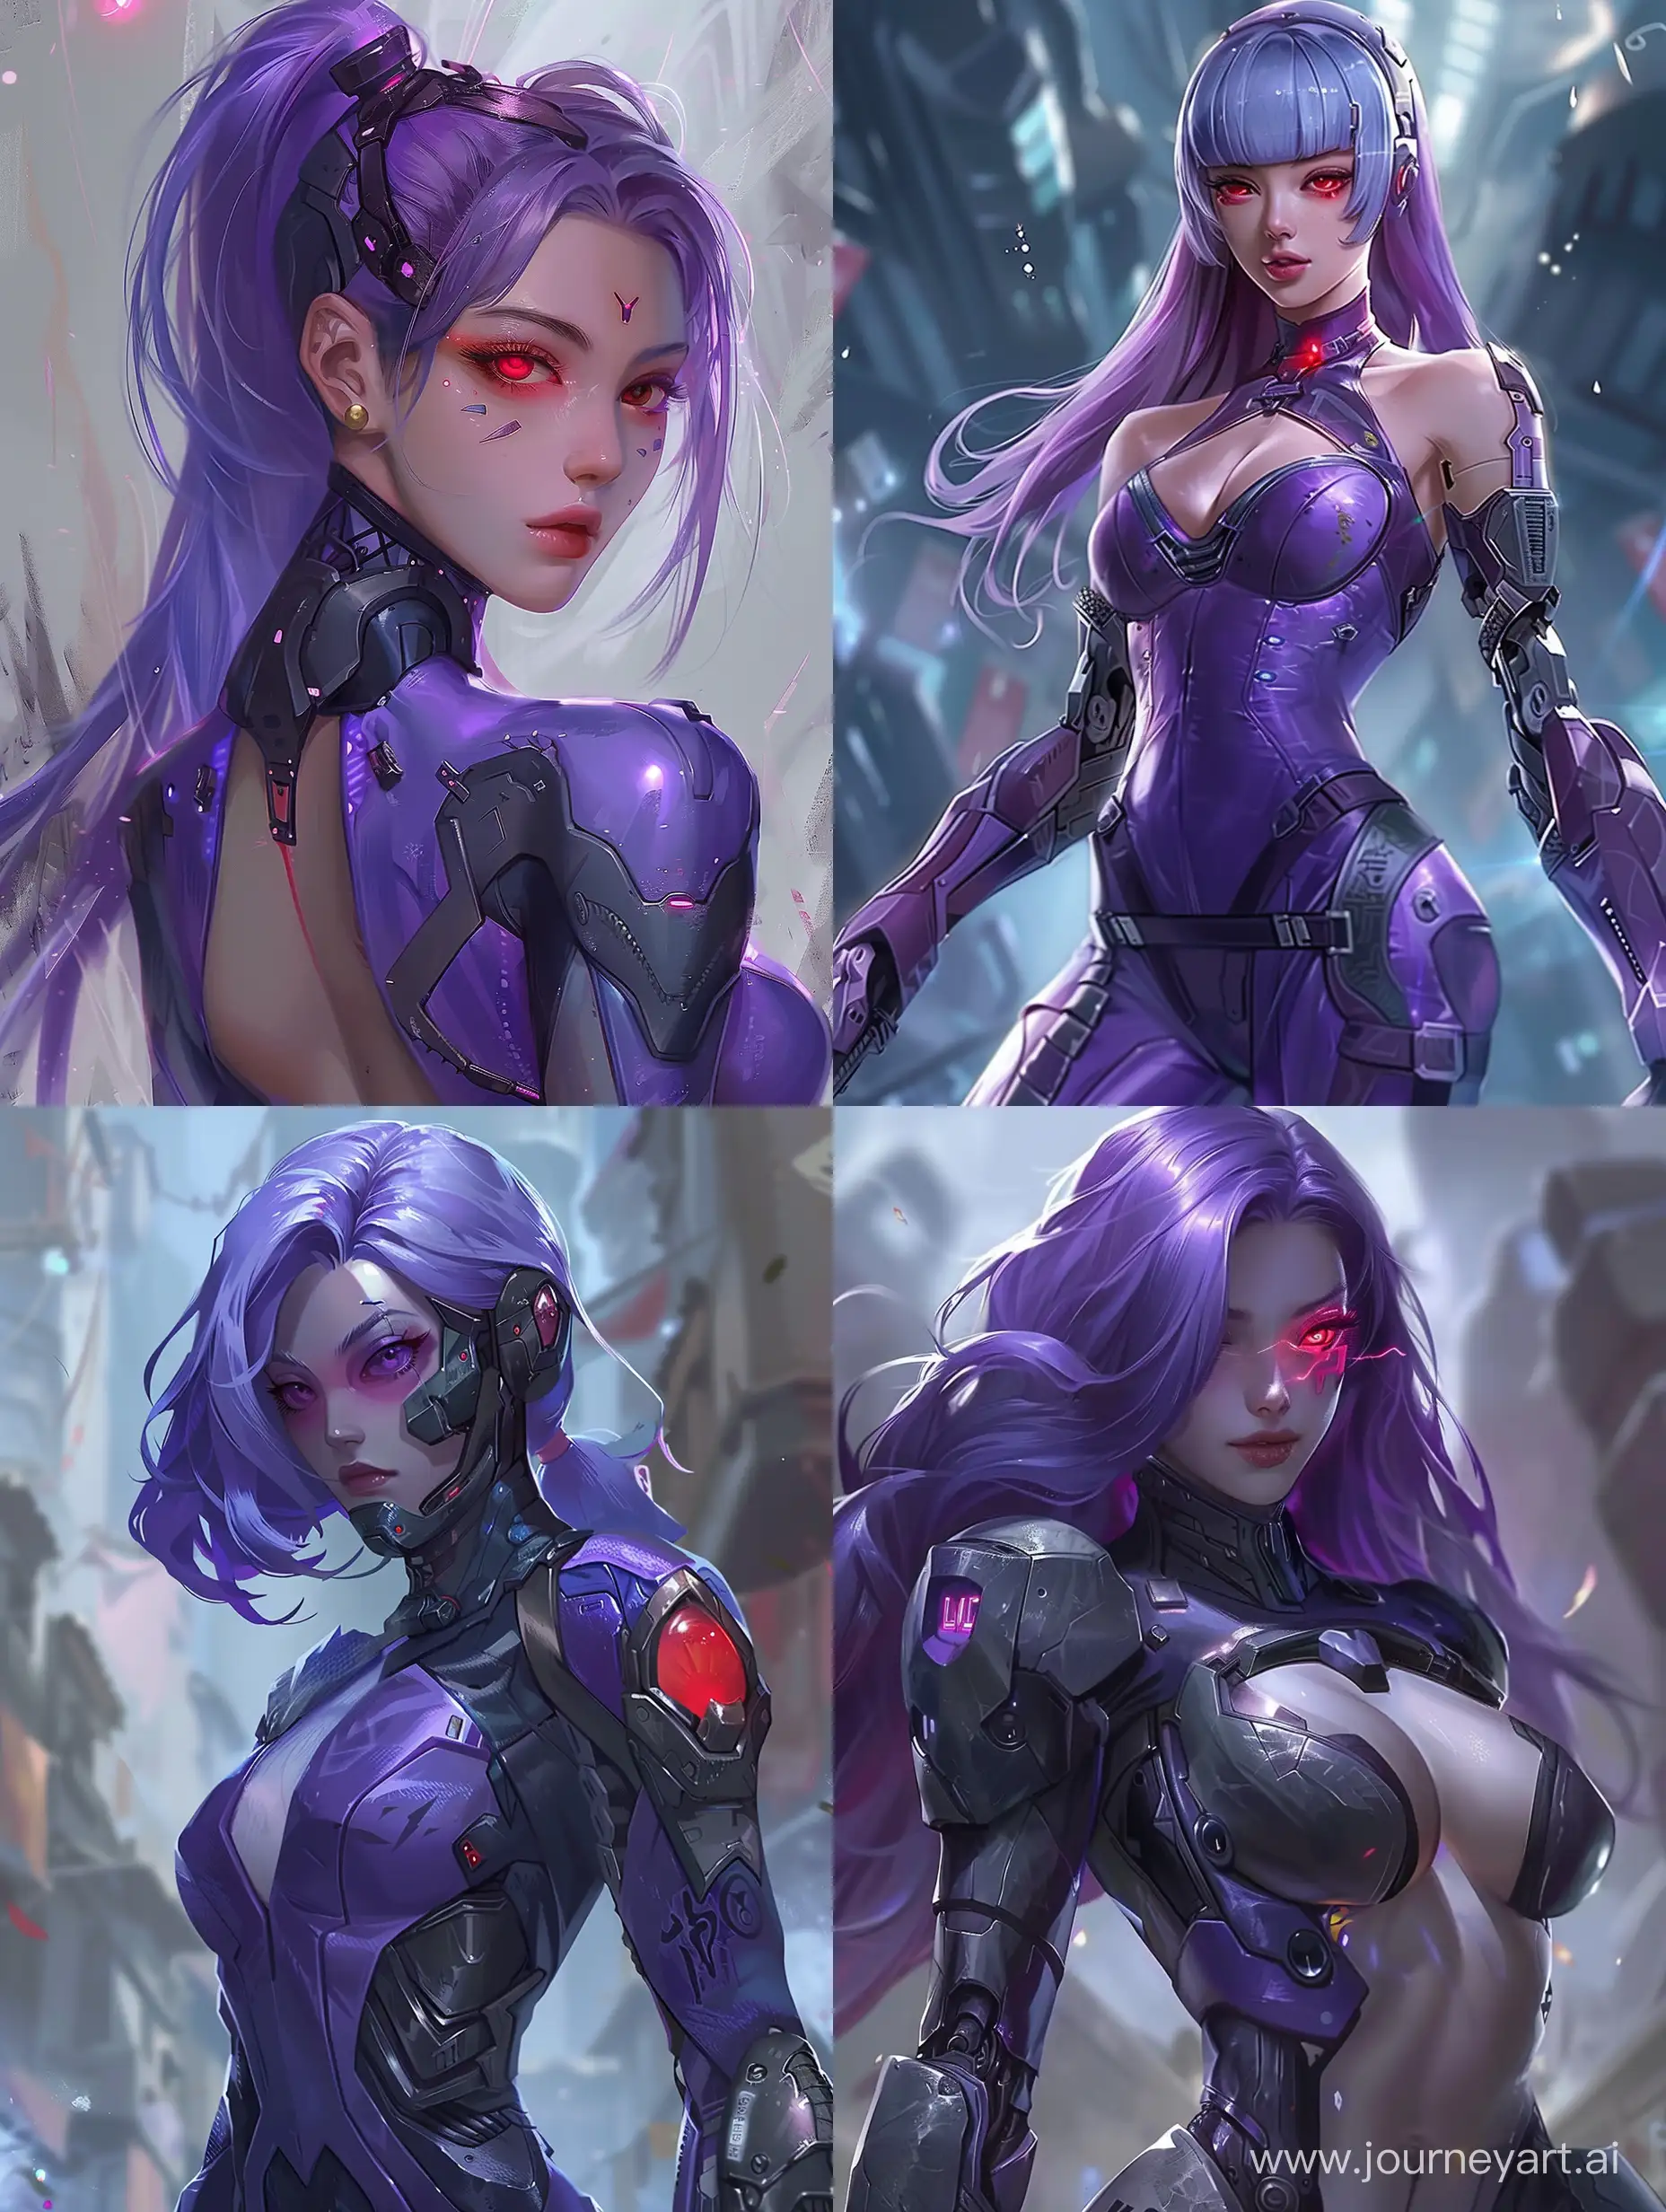 Lilia-from-Mobile-Legends-Bang-Bang-Purple-Cyborg-with-Glowing-Red-Eye-and-Exoskeleton